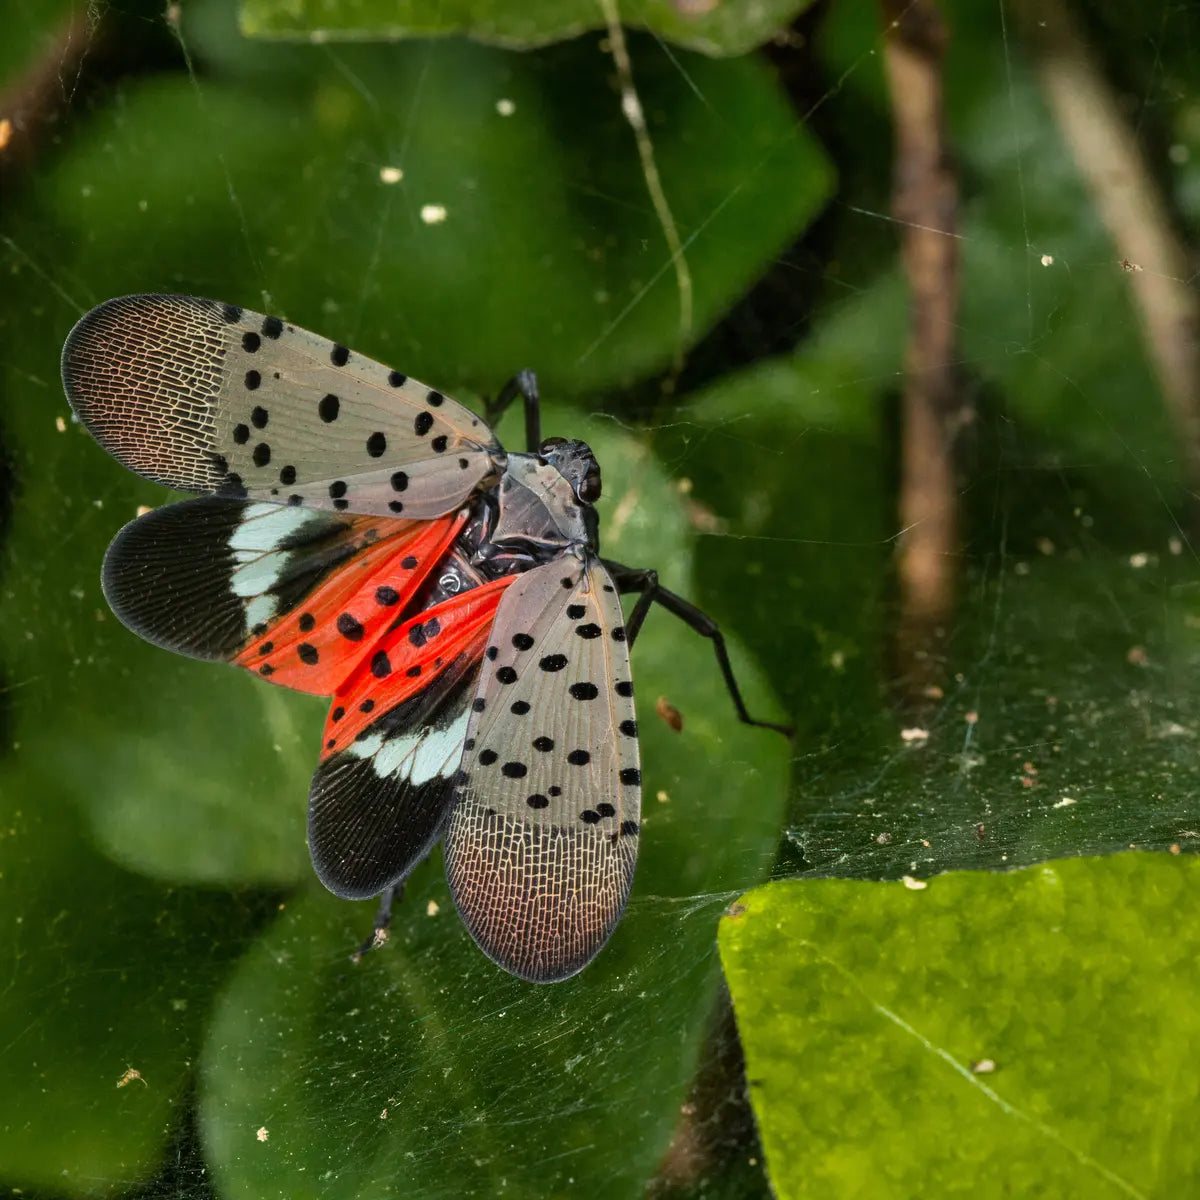 How to Spot and Control Spotted Lantern Flies